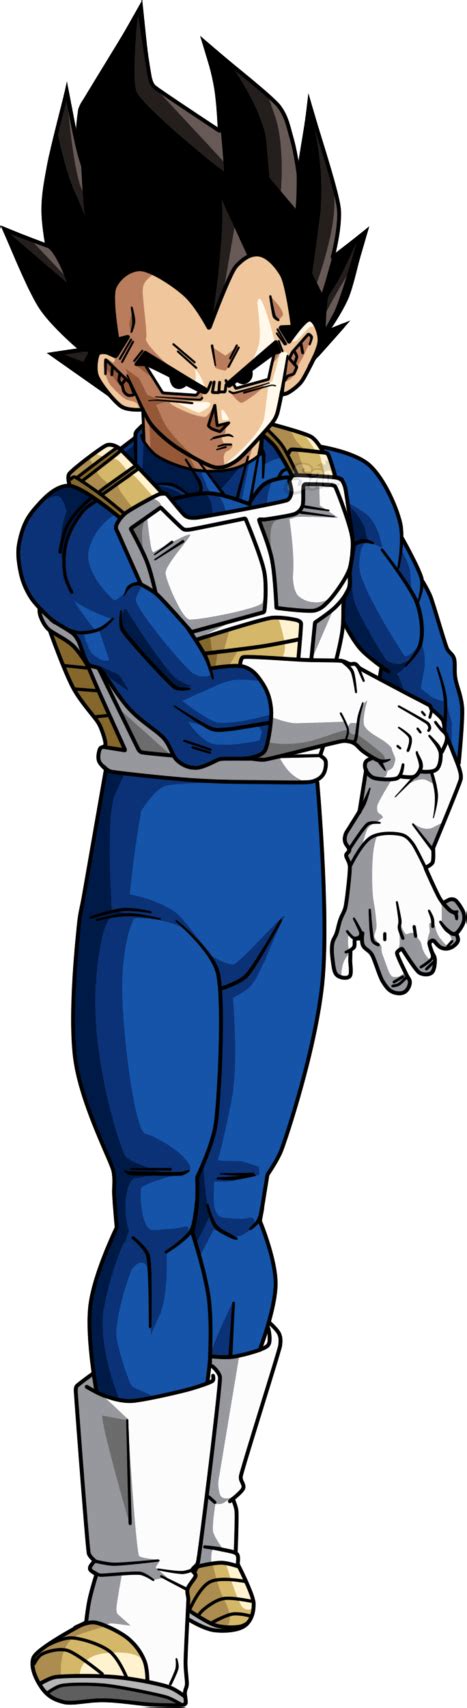 Kakarot rpg game, by bandai namco and cyberconnect2. Vegeta - Universe Survival DBS by SaoDVD on DeviantArt